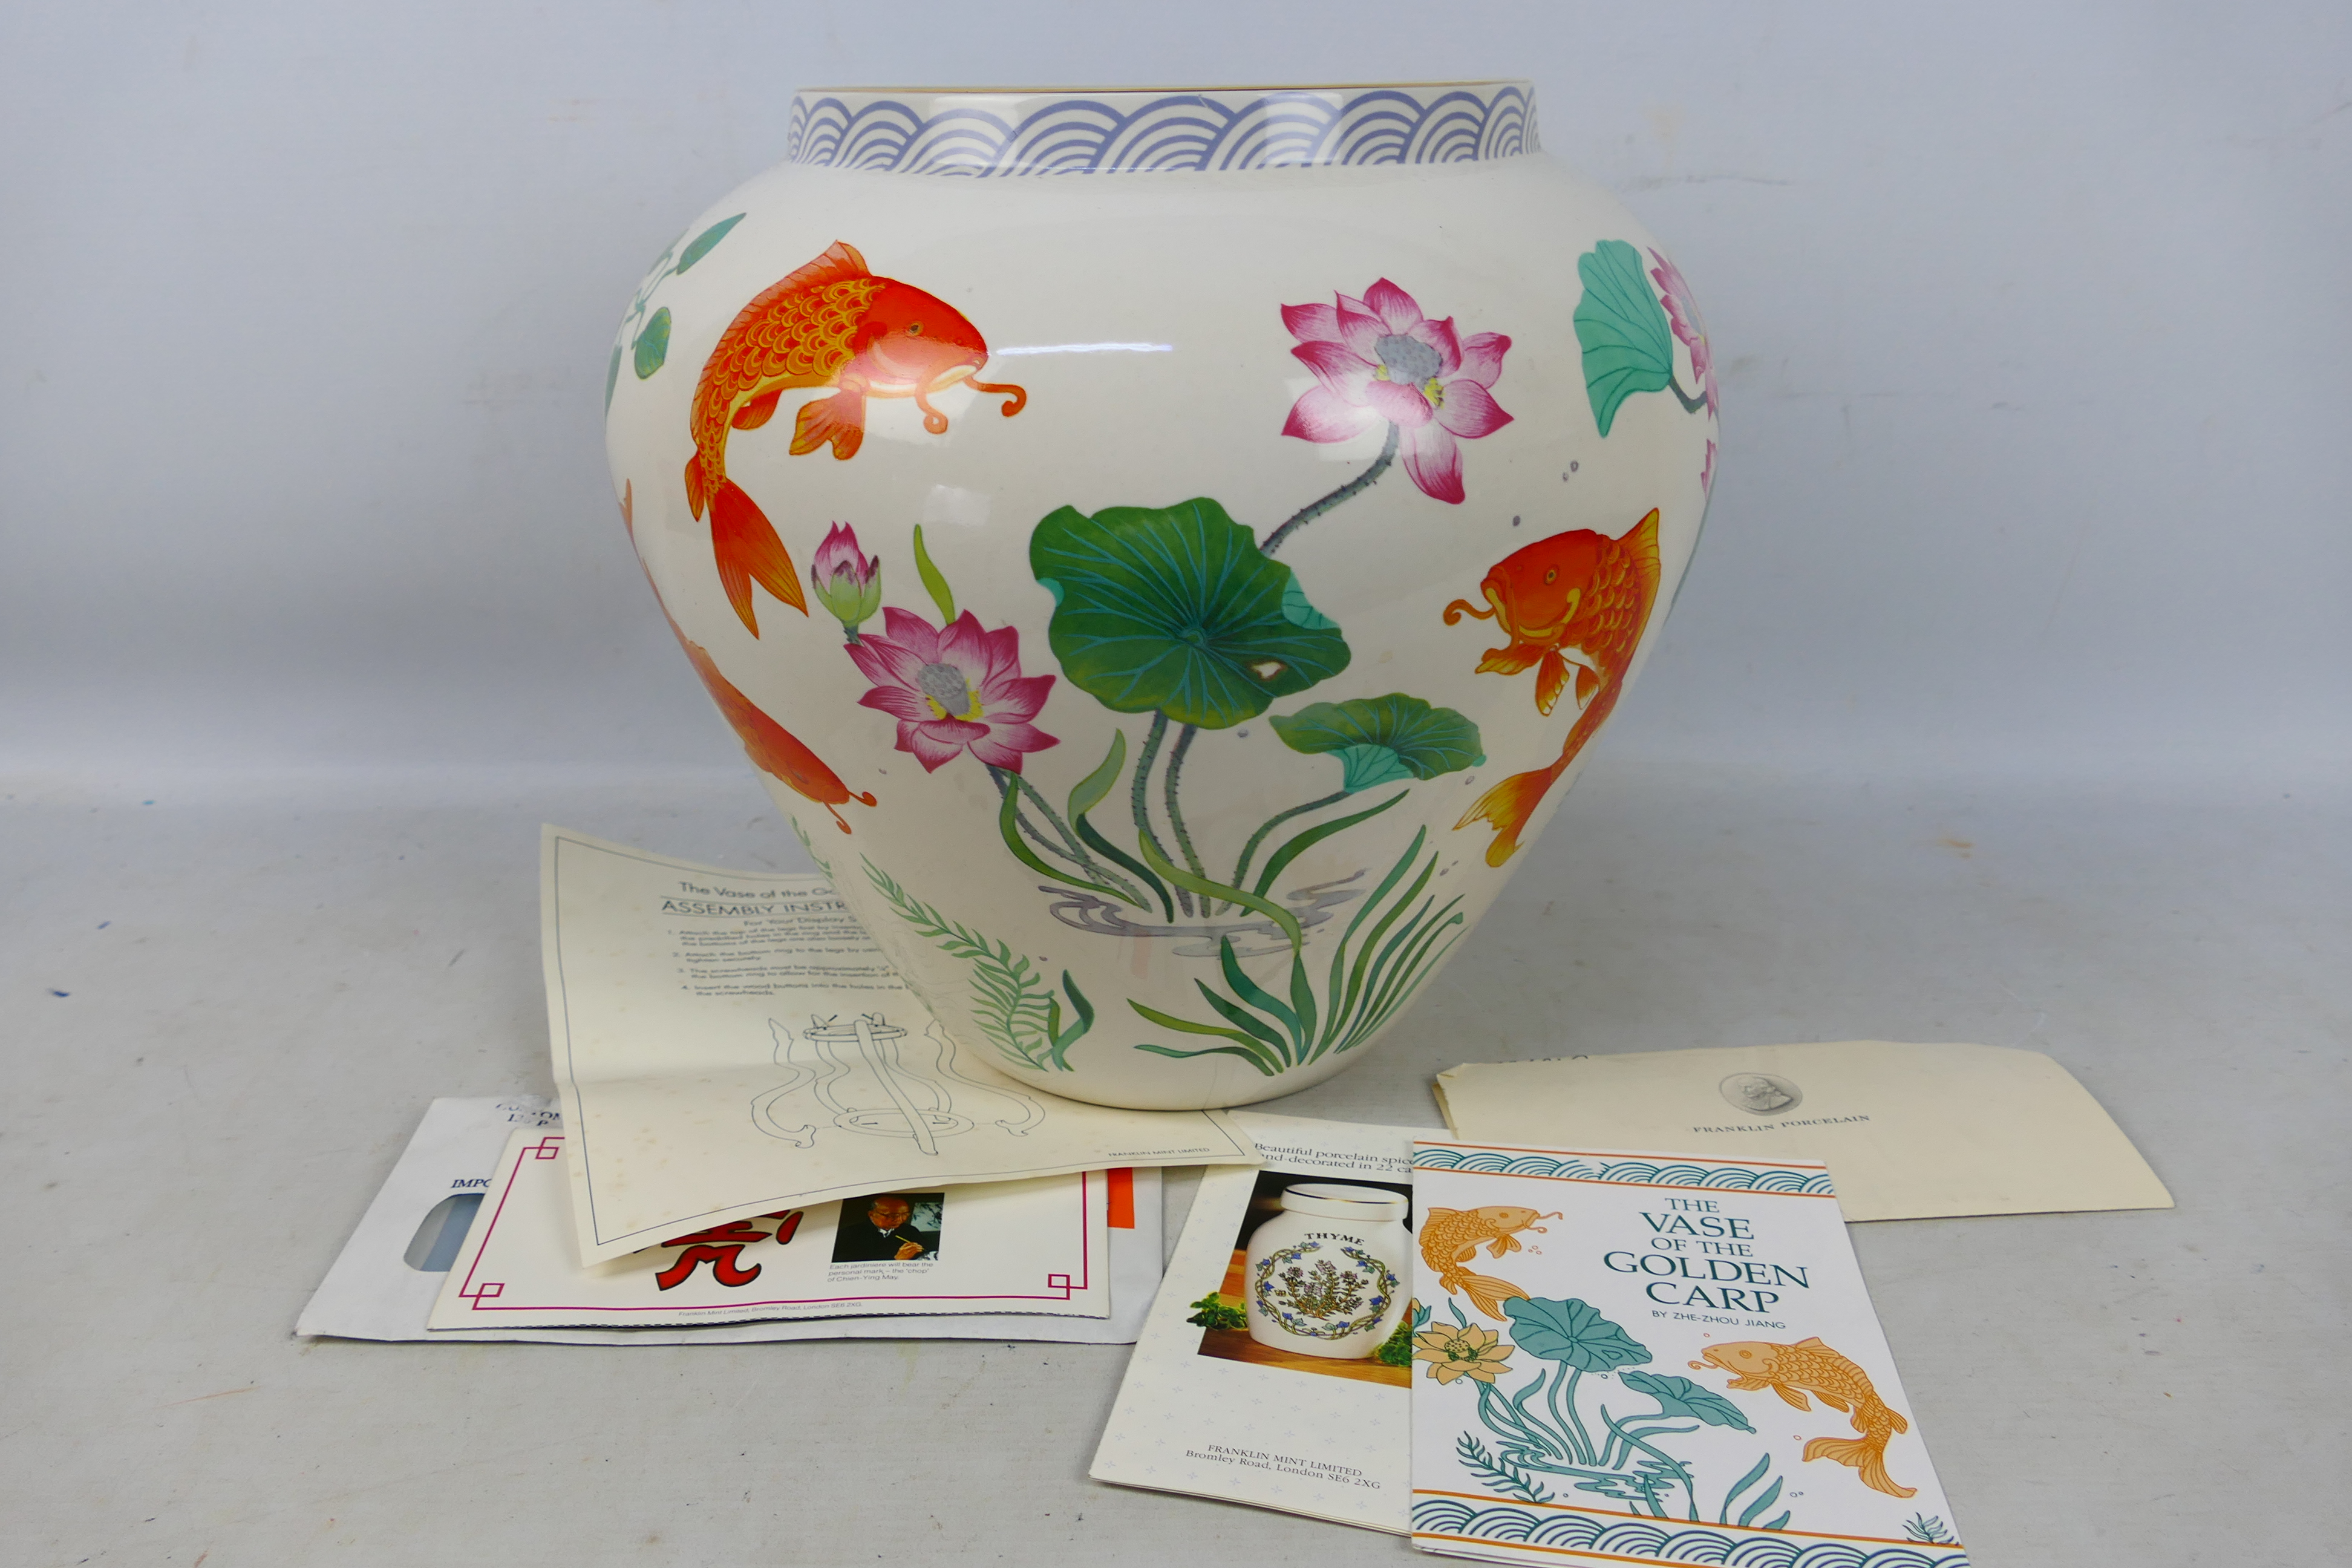 A large vase by Franklin Mint entitled The Vase of The Golden Carp by Zhe Zhou Jiang,